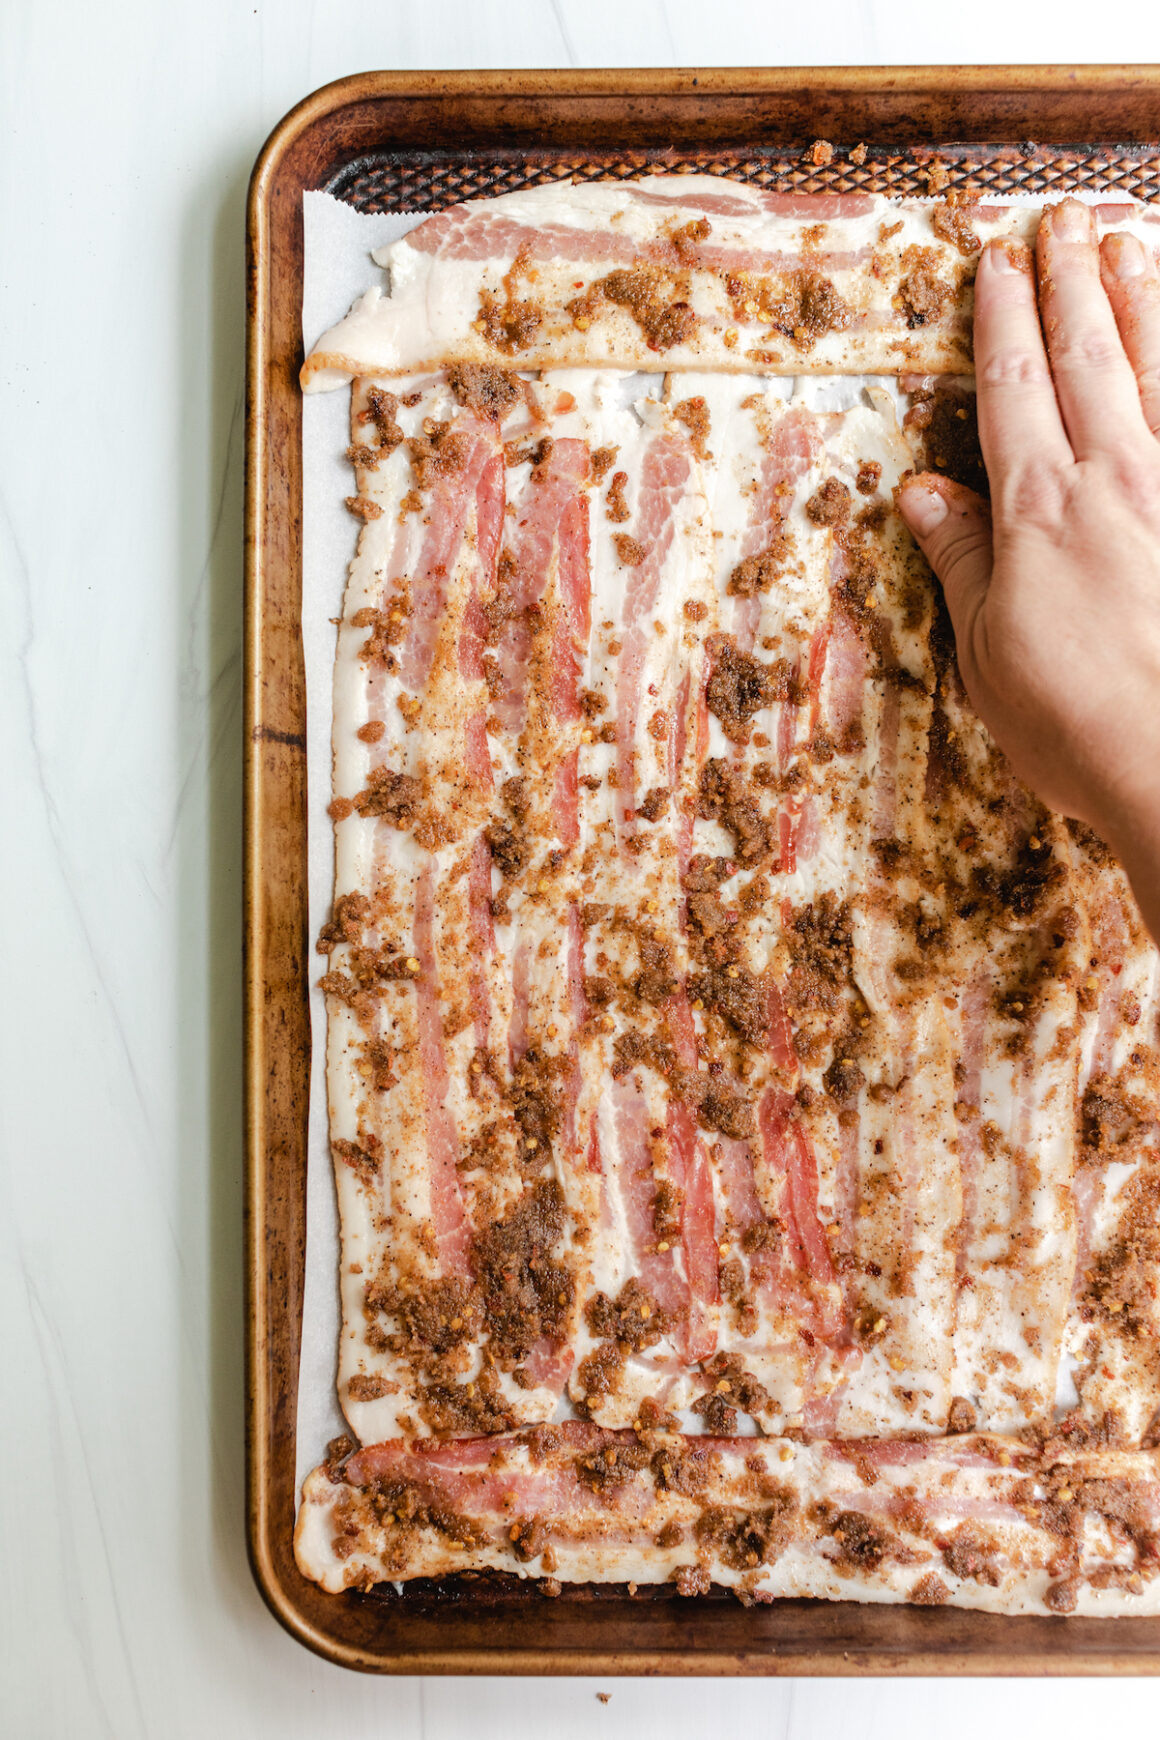 Hand spreading sugar and spice mixture over bacon on a baking sheet to make Million Dollar Bacon